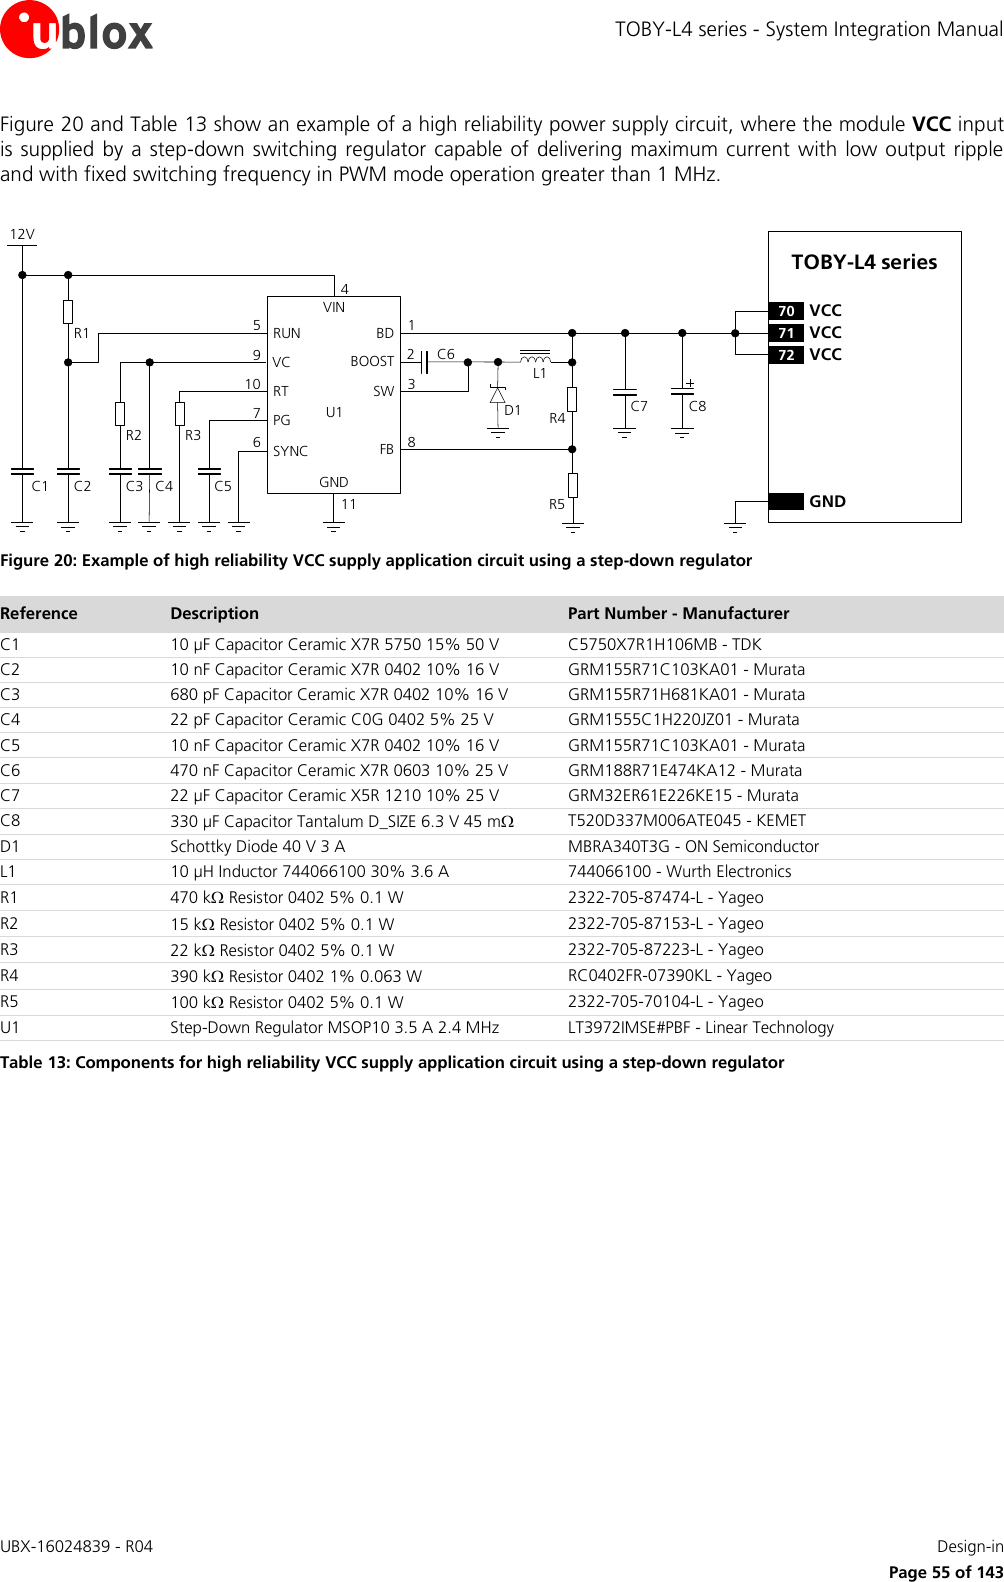 TOBY-L4 series - System Integration Manual UBX-16024839 - R04    Design-in     Page 55 of 143 Figure 20 and Table 13 show an example of a high reliability power supply circuit, where the module VCC input is supplied by a  step-down  switching regulator capable  of  delivering maximum current with low output ripple and with fixed switching frequency in PWM mode operation greater than 1 MHz.  12VC5R3C4R2C2C1R1VINRUNVCRTPGSYNCBDBOOSTSWFBGND671095C61238114C7 C8D1 R4R5L1C3U1TOBY-L4 series71 VCC72 VCC70 VCCGND Figure 20: Example of high reliability VCC supply application circuit using a step-down regulator Reference Description Part Number - Manufacturer C1 10 µF Capacitor Ceramic X7R 5750 15% 50 V C5750X7R1H106MB - TDK C2 10 nF Capacitor Ceramic X7R 0402 10% 16 V GRM155R71C103KA01 - Murata C3 680 pF Capacitor Ceramic X7R 0402 10% 16 V GRM155R71H681KA01 - Murata C4 22 pF Capacitor Ceramic C0G 0402 5% 25 V GRM1555C1H220JZ01 - Murata C5 10 nF Capacitor Ceramic X7R 0402 10% 16 V GRM155R71C103KA01 - Murata C6 470 nF Capacitor Ceramic X7R 0603 10% 25 V GRM188R71E474KA12 - Murata C7 22 µF Capacitor Ceramic X5R 1210 10% 25 V GRM32ER61E226KE15 - Murata C8 330 µF Capacitor Tantalum D_SIZE 6.3 V 45 m T520D337M006ATE045 - KEMET D1 Schottky Diode 40 V 3 A MBRA340T3G - ON Semiconductor L1 10 µH Inductor 744066100 30% 3.6 A 744066100 - Wurth Electronics R1 470 k Resistor 0402 5% 0.1 W 2322-705-87474-L - Yageo R2 15 k Resistor 0402 5% 0.1 W 2322-705-87153-L - Yageo R3 22 k Resistor 0402 5% 0.1 W 2322-705-87223-L - Yageo R4 390 k Resistor 0402 1% 0.063 W RC0402FR-07390KL - Yageo R5 100 k Resistor 0402 5% 0.1 W 2322-705-70104-L - Yageo U1 Step-Down Regulator MSOP10 3.5 A 2.4 MHz LT3972IMSE#PBF - Linear Technology Table 13: Components for high reliability VCC supply application circuit using a step-down regulator 